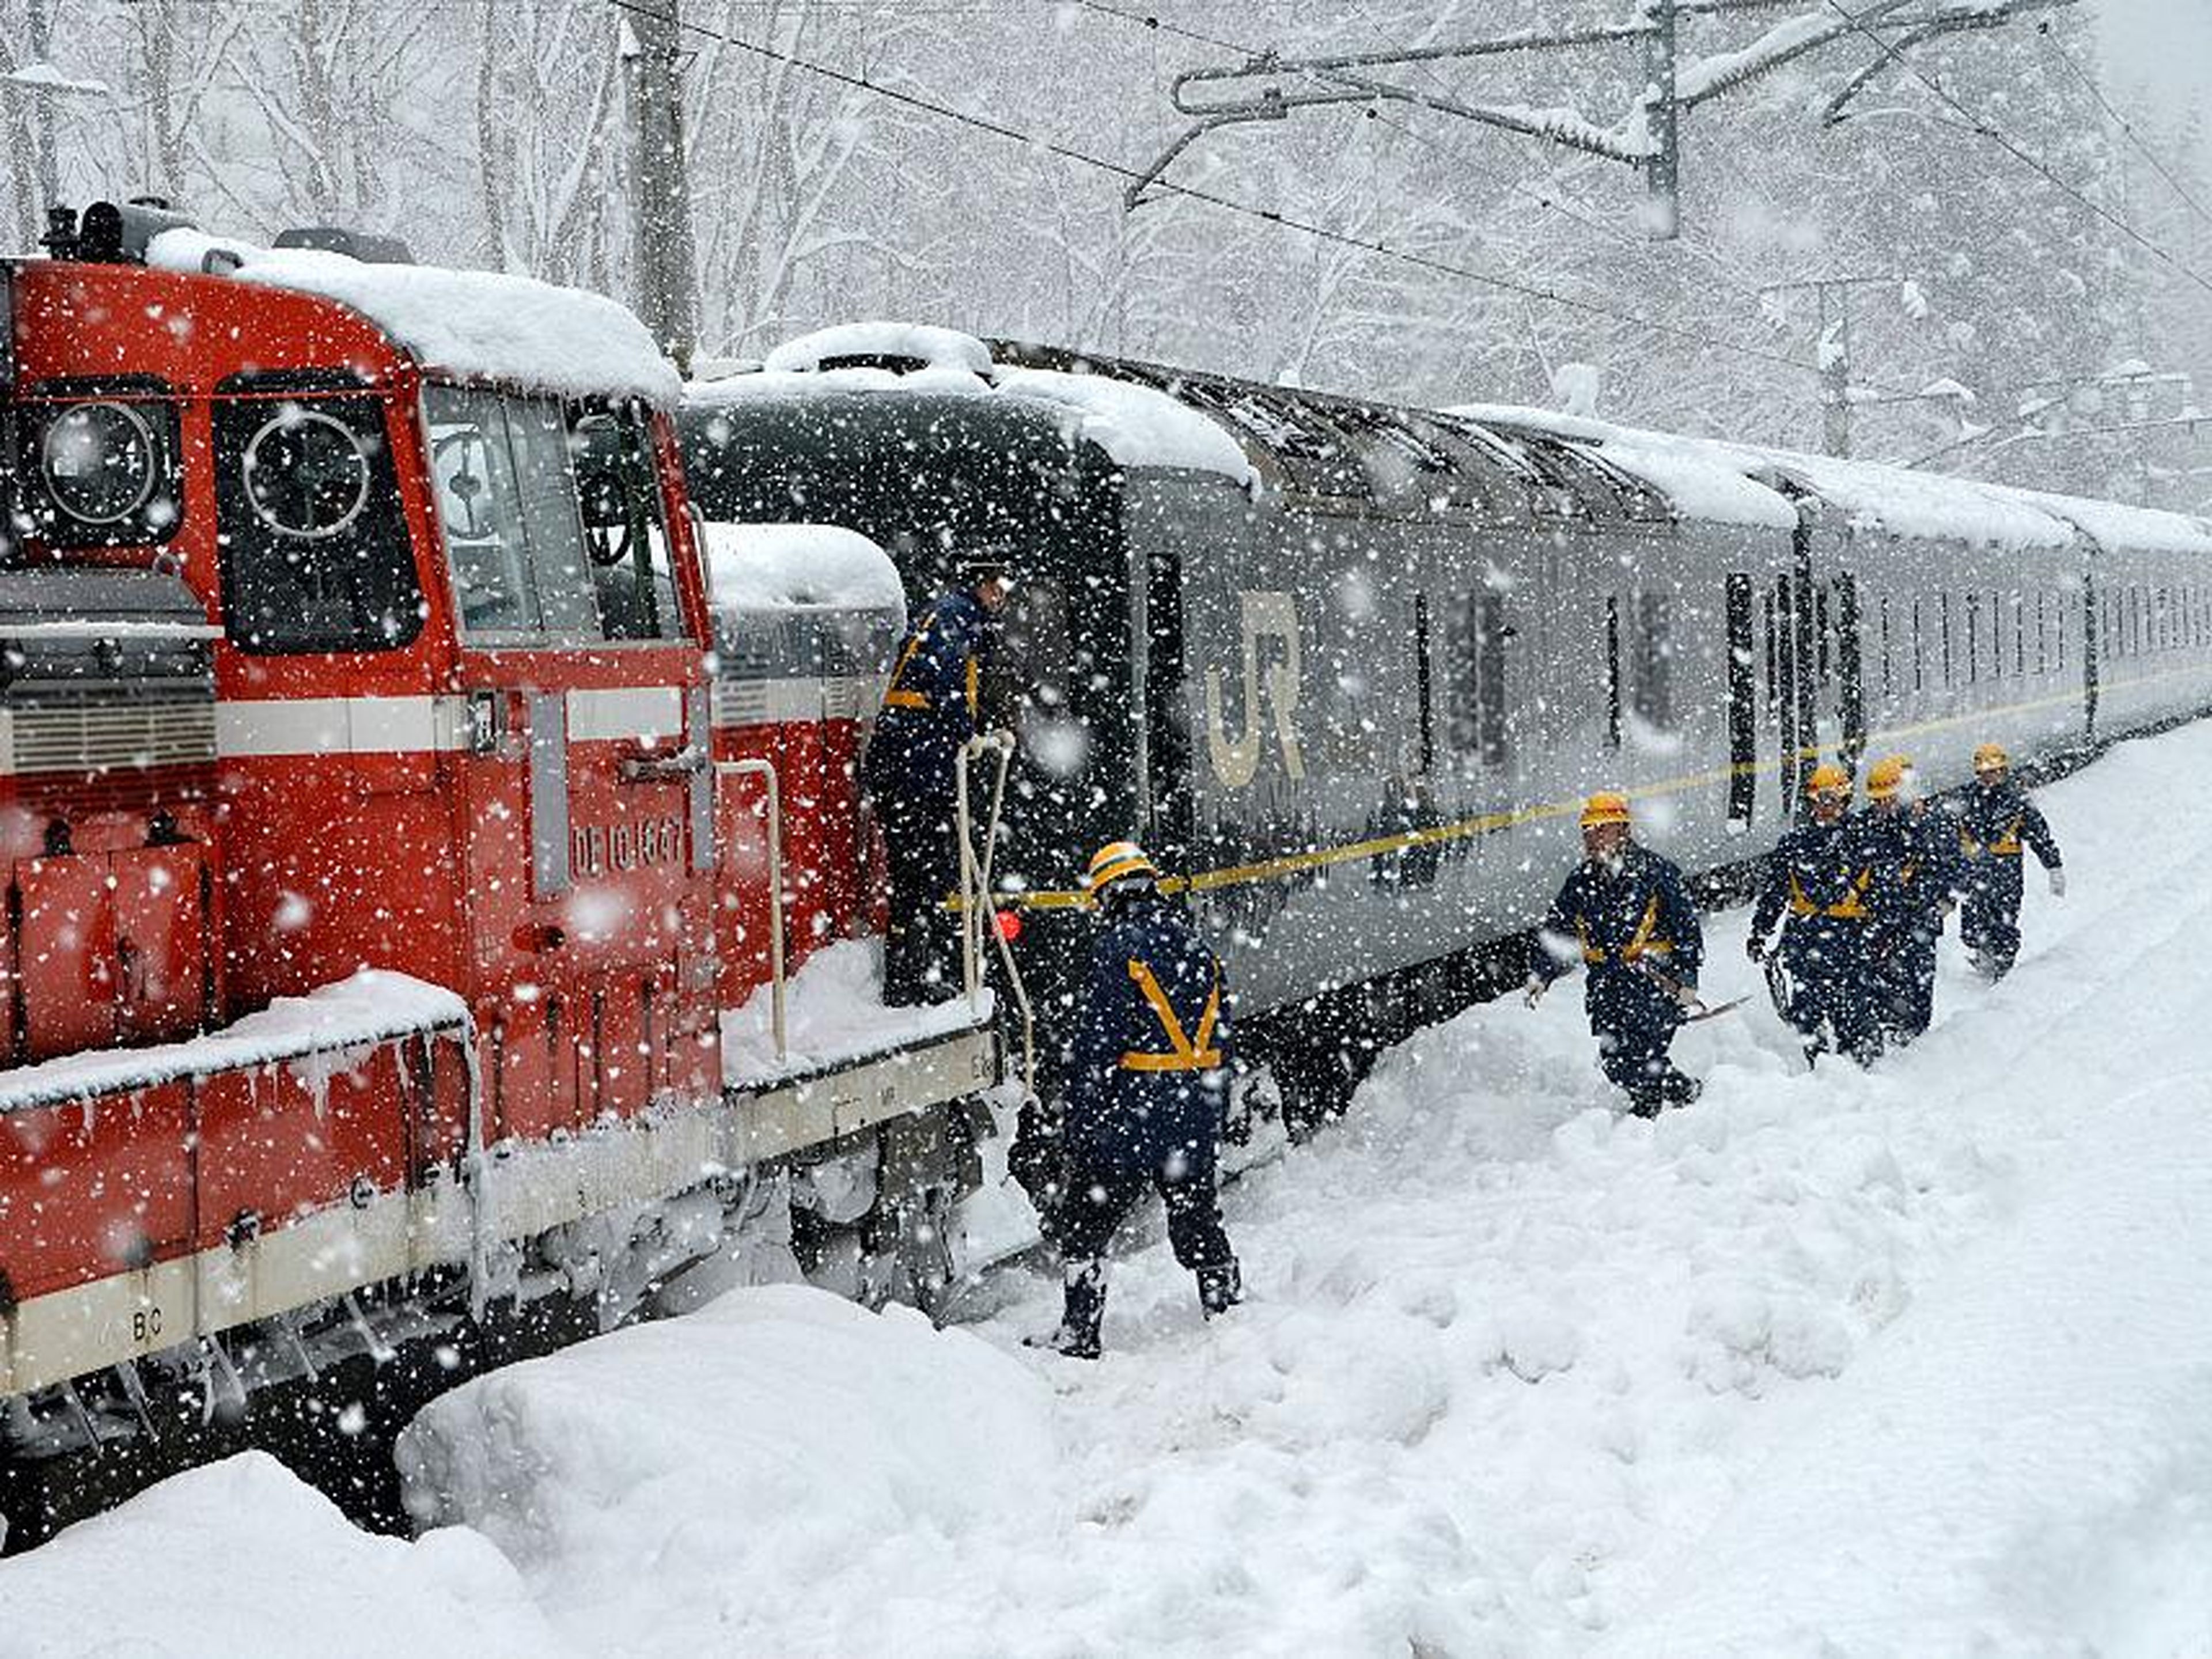 While there's a chance you could be snowed in and stuck onboard your train ...